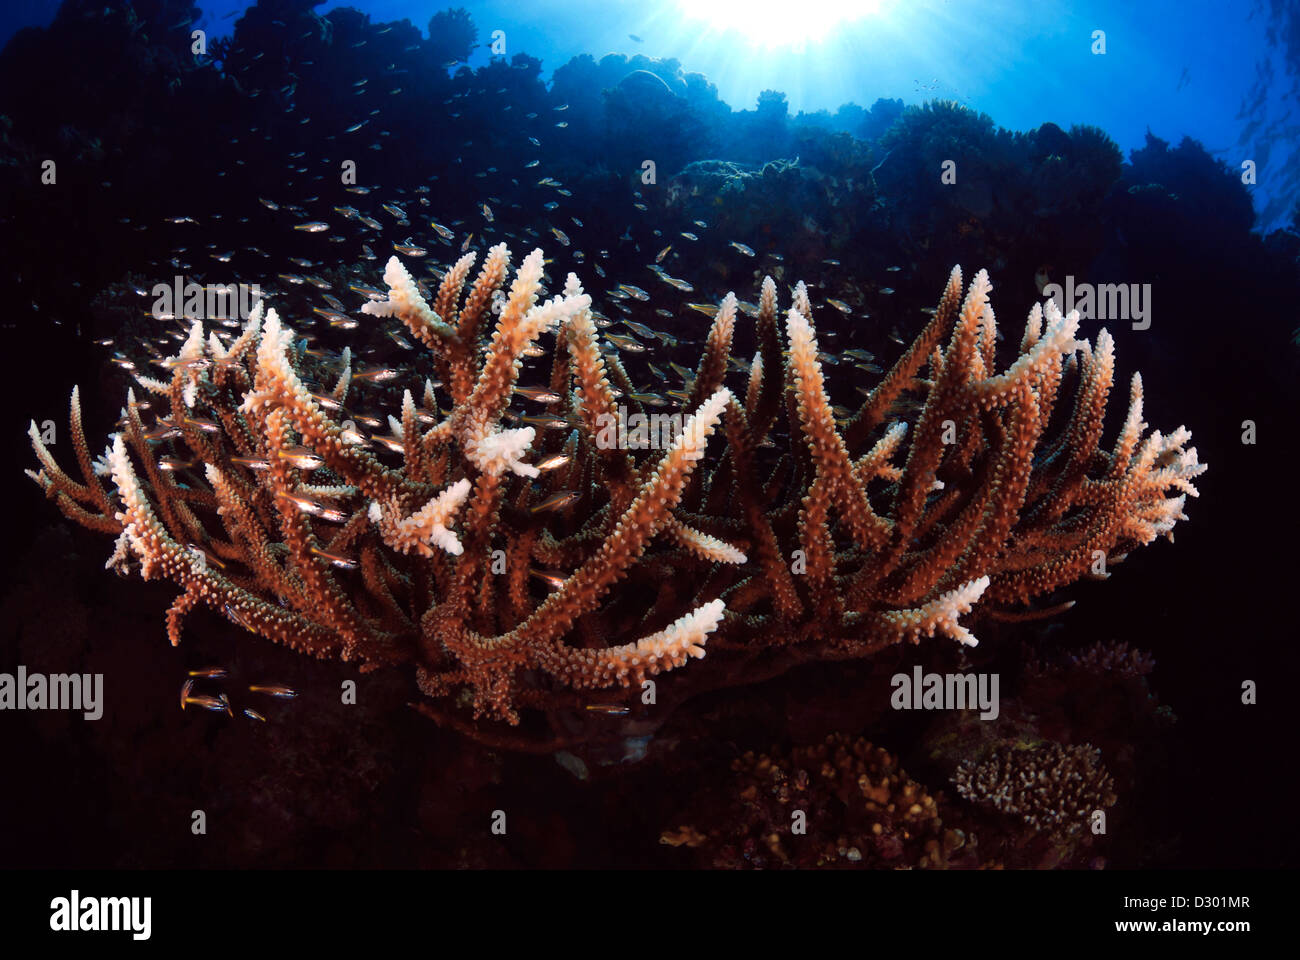 Staghorn Coral Acropora formosa with Reef Fish, Great Barrier Reef, Coral Sea, Pacific Ocean, Queensland, Australia Stock Photo